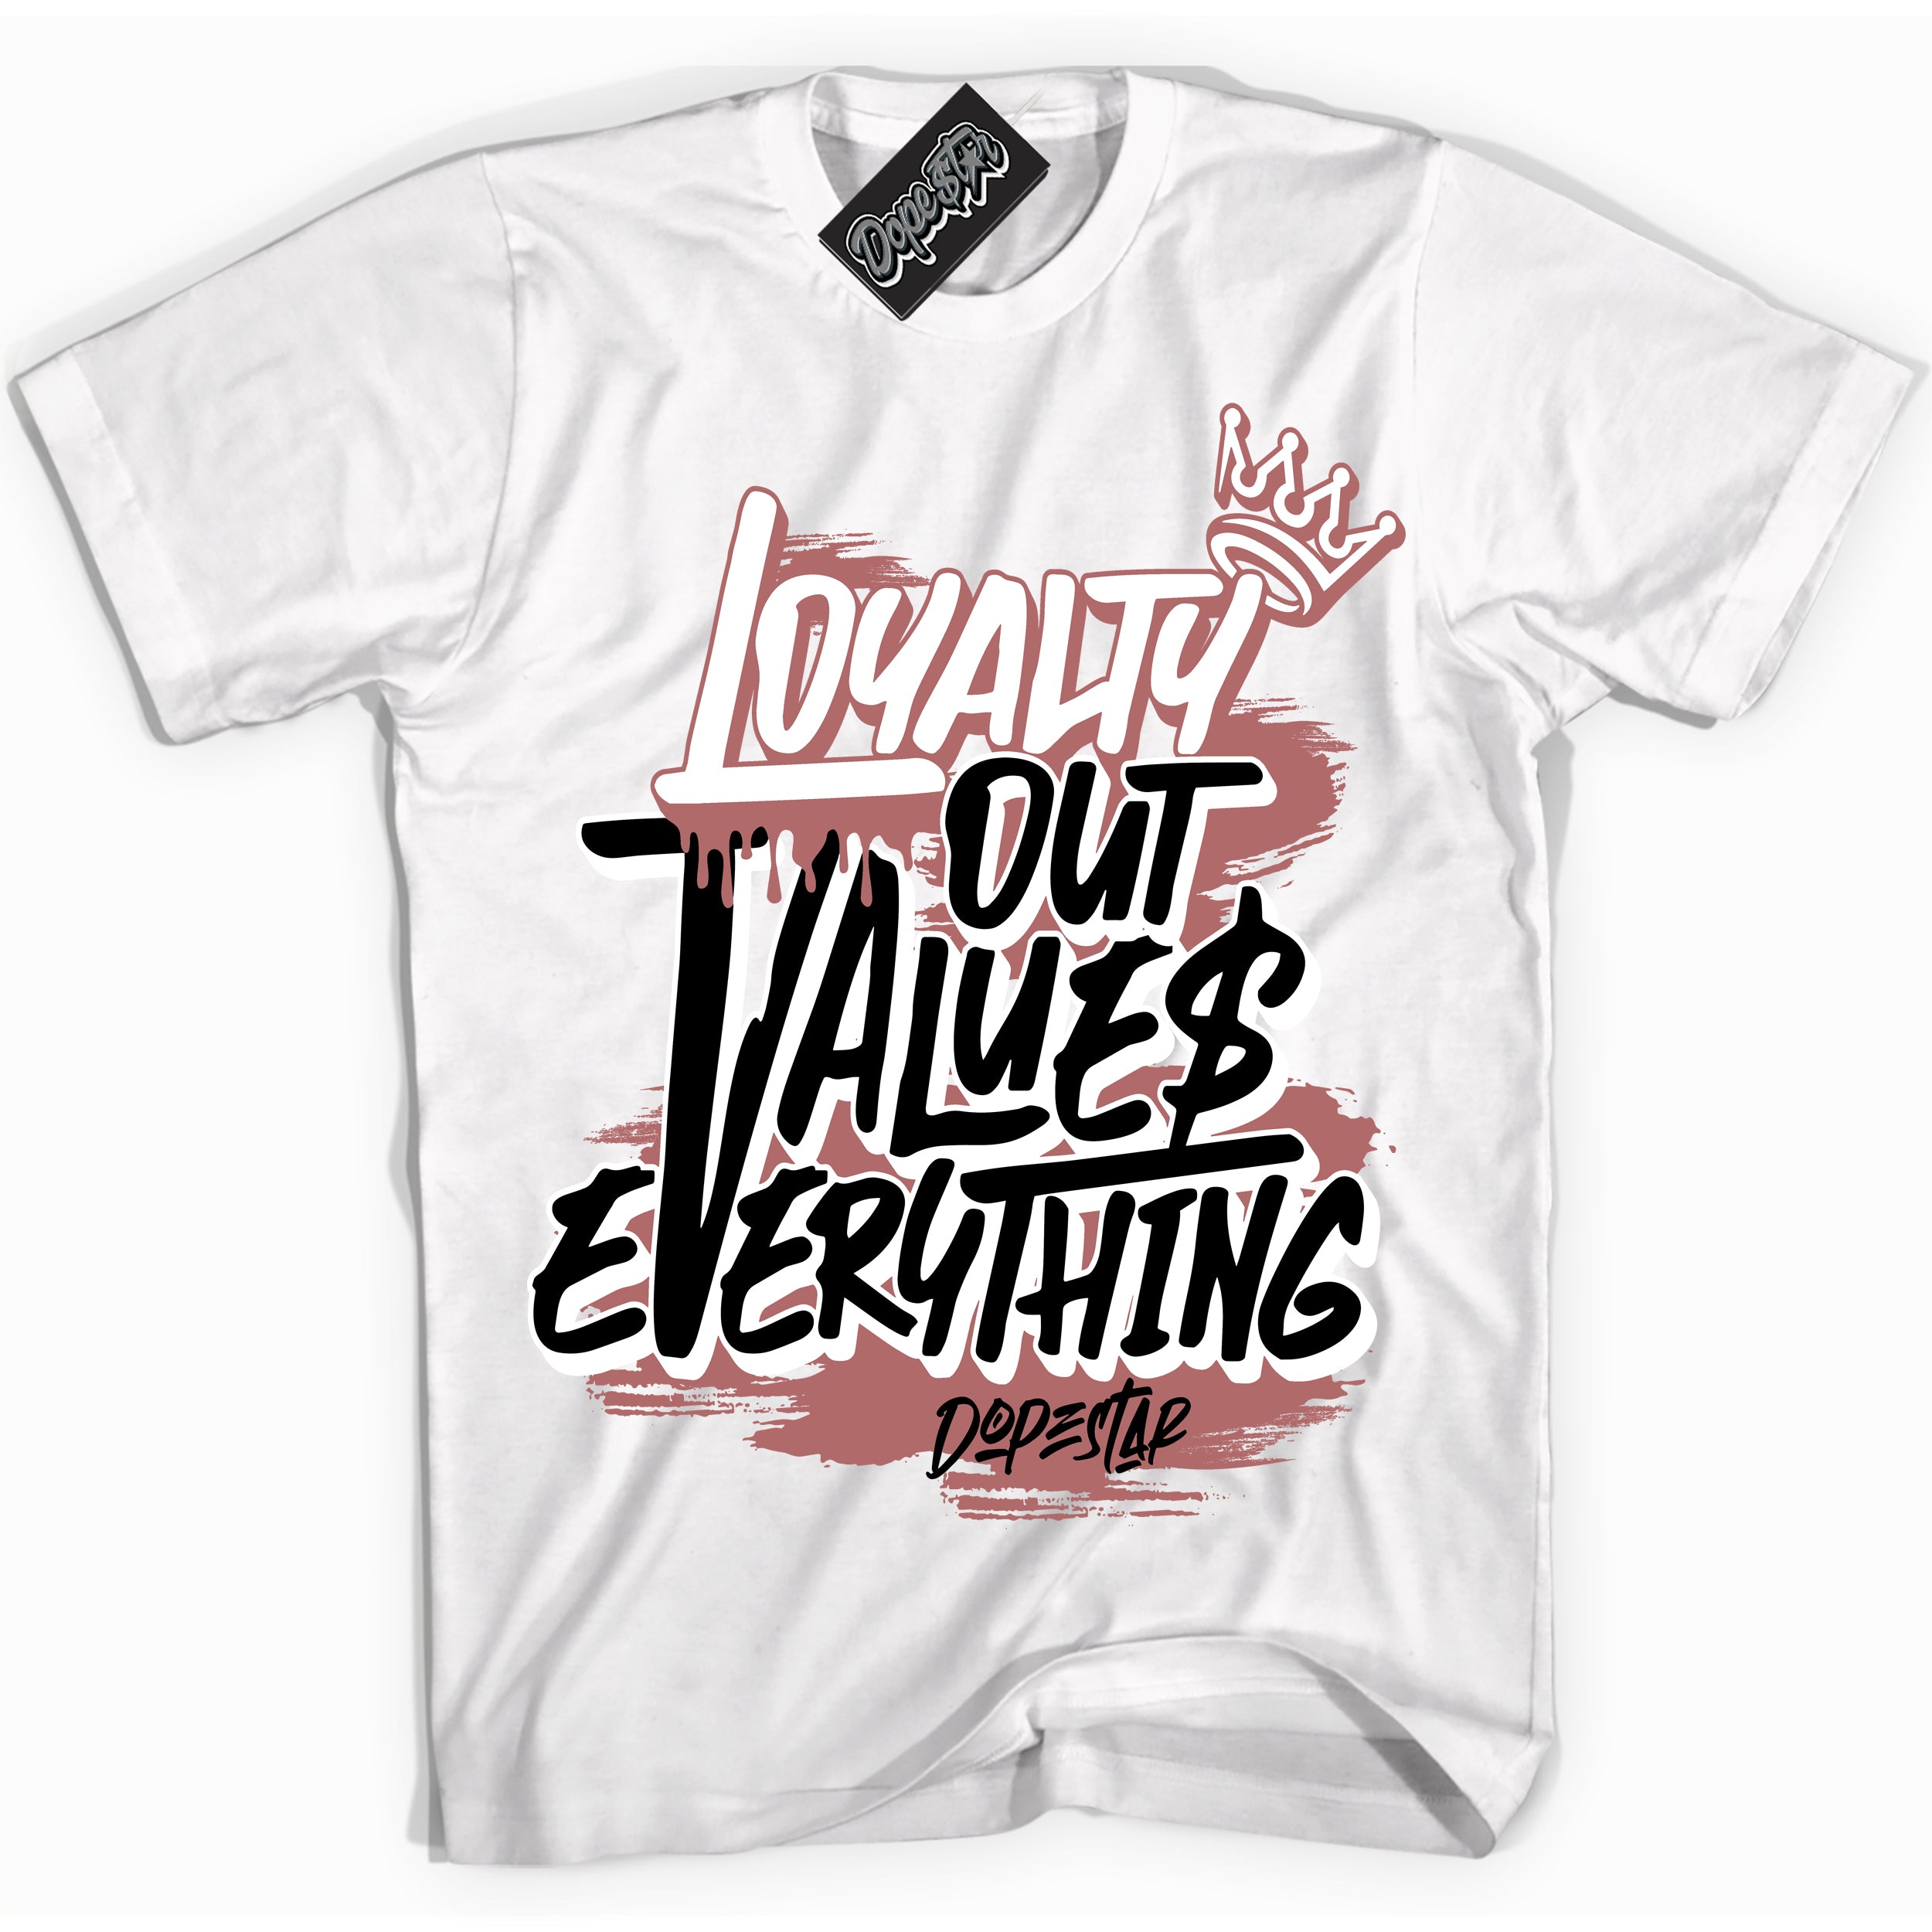 Cool White Shirt with “ Loyalty Out Values Everything” design that perfectly matches Golf Rust Pink 1s Sneakers.